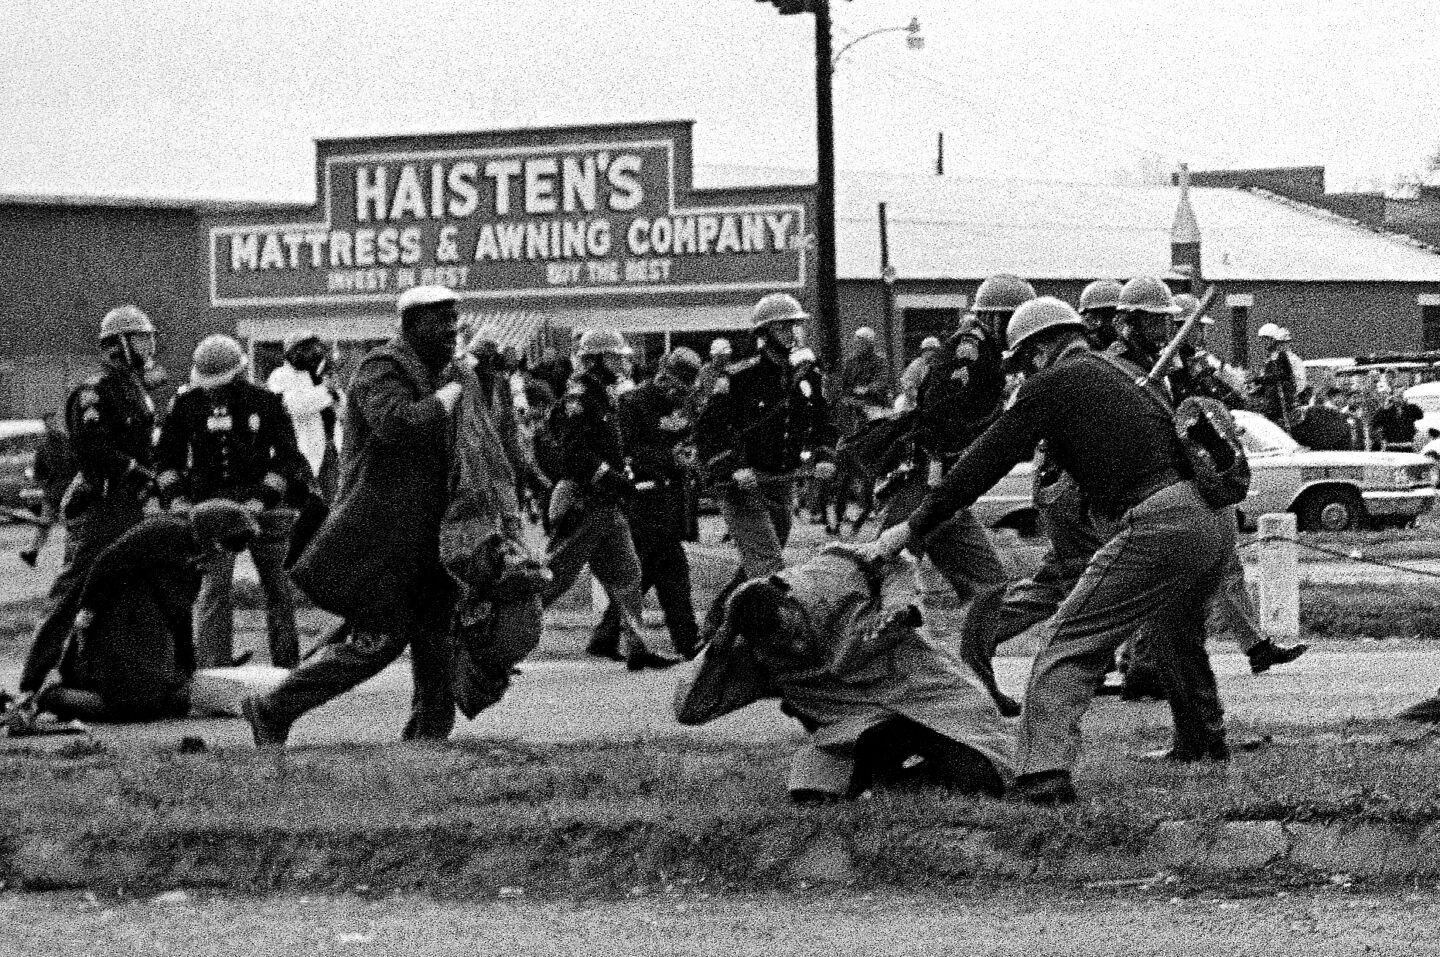 John Lewis is clubbed in the head by an Alabama state trooper during the Selma civil rights march in 1965